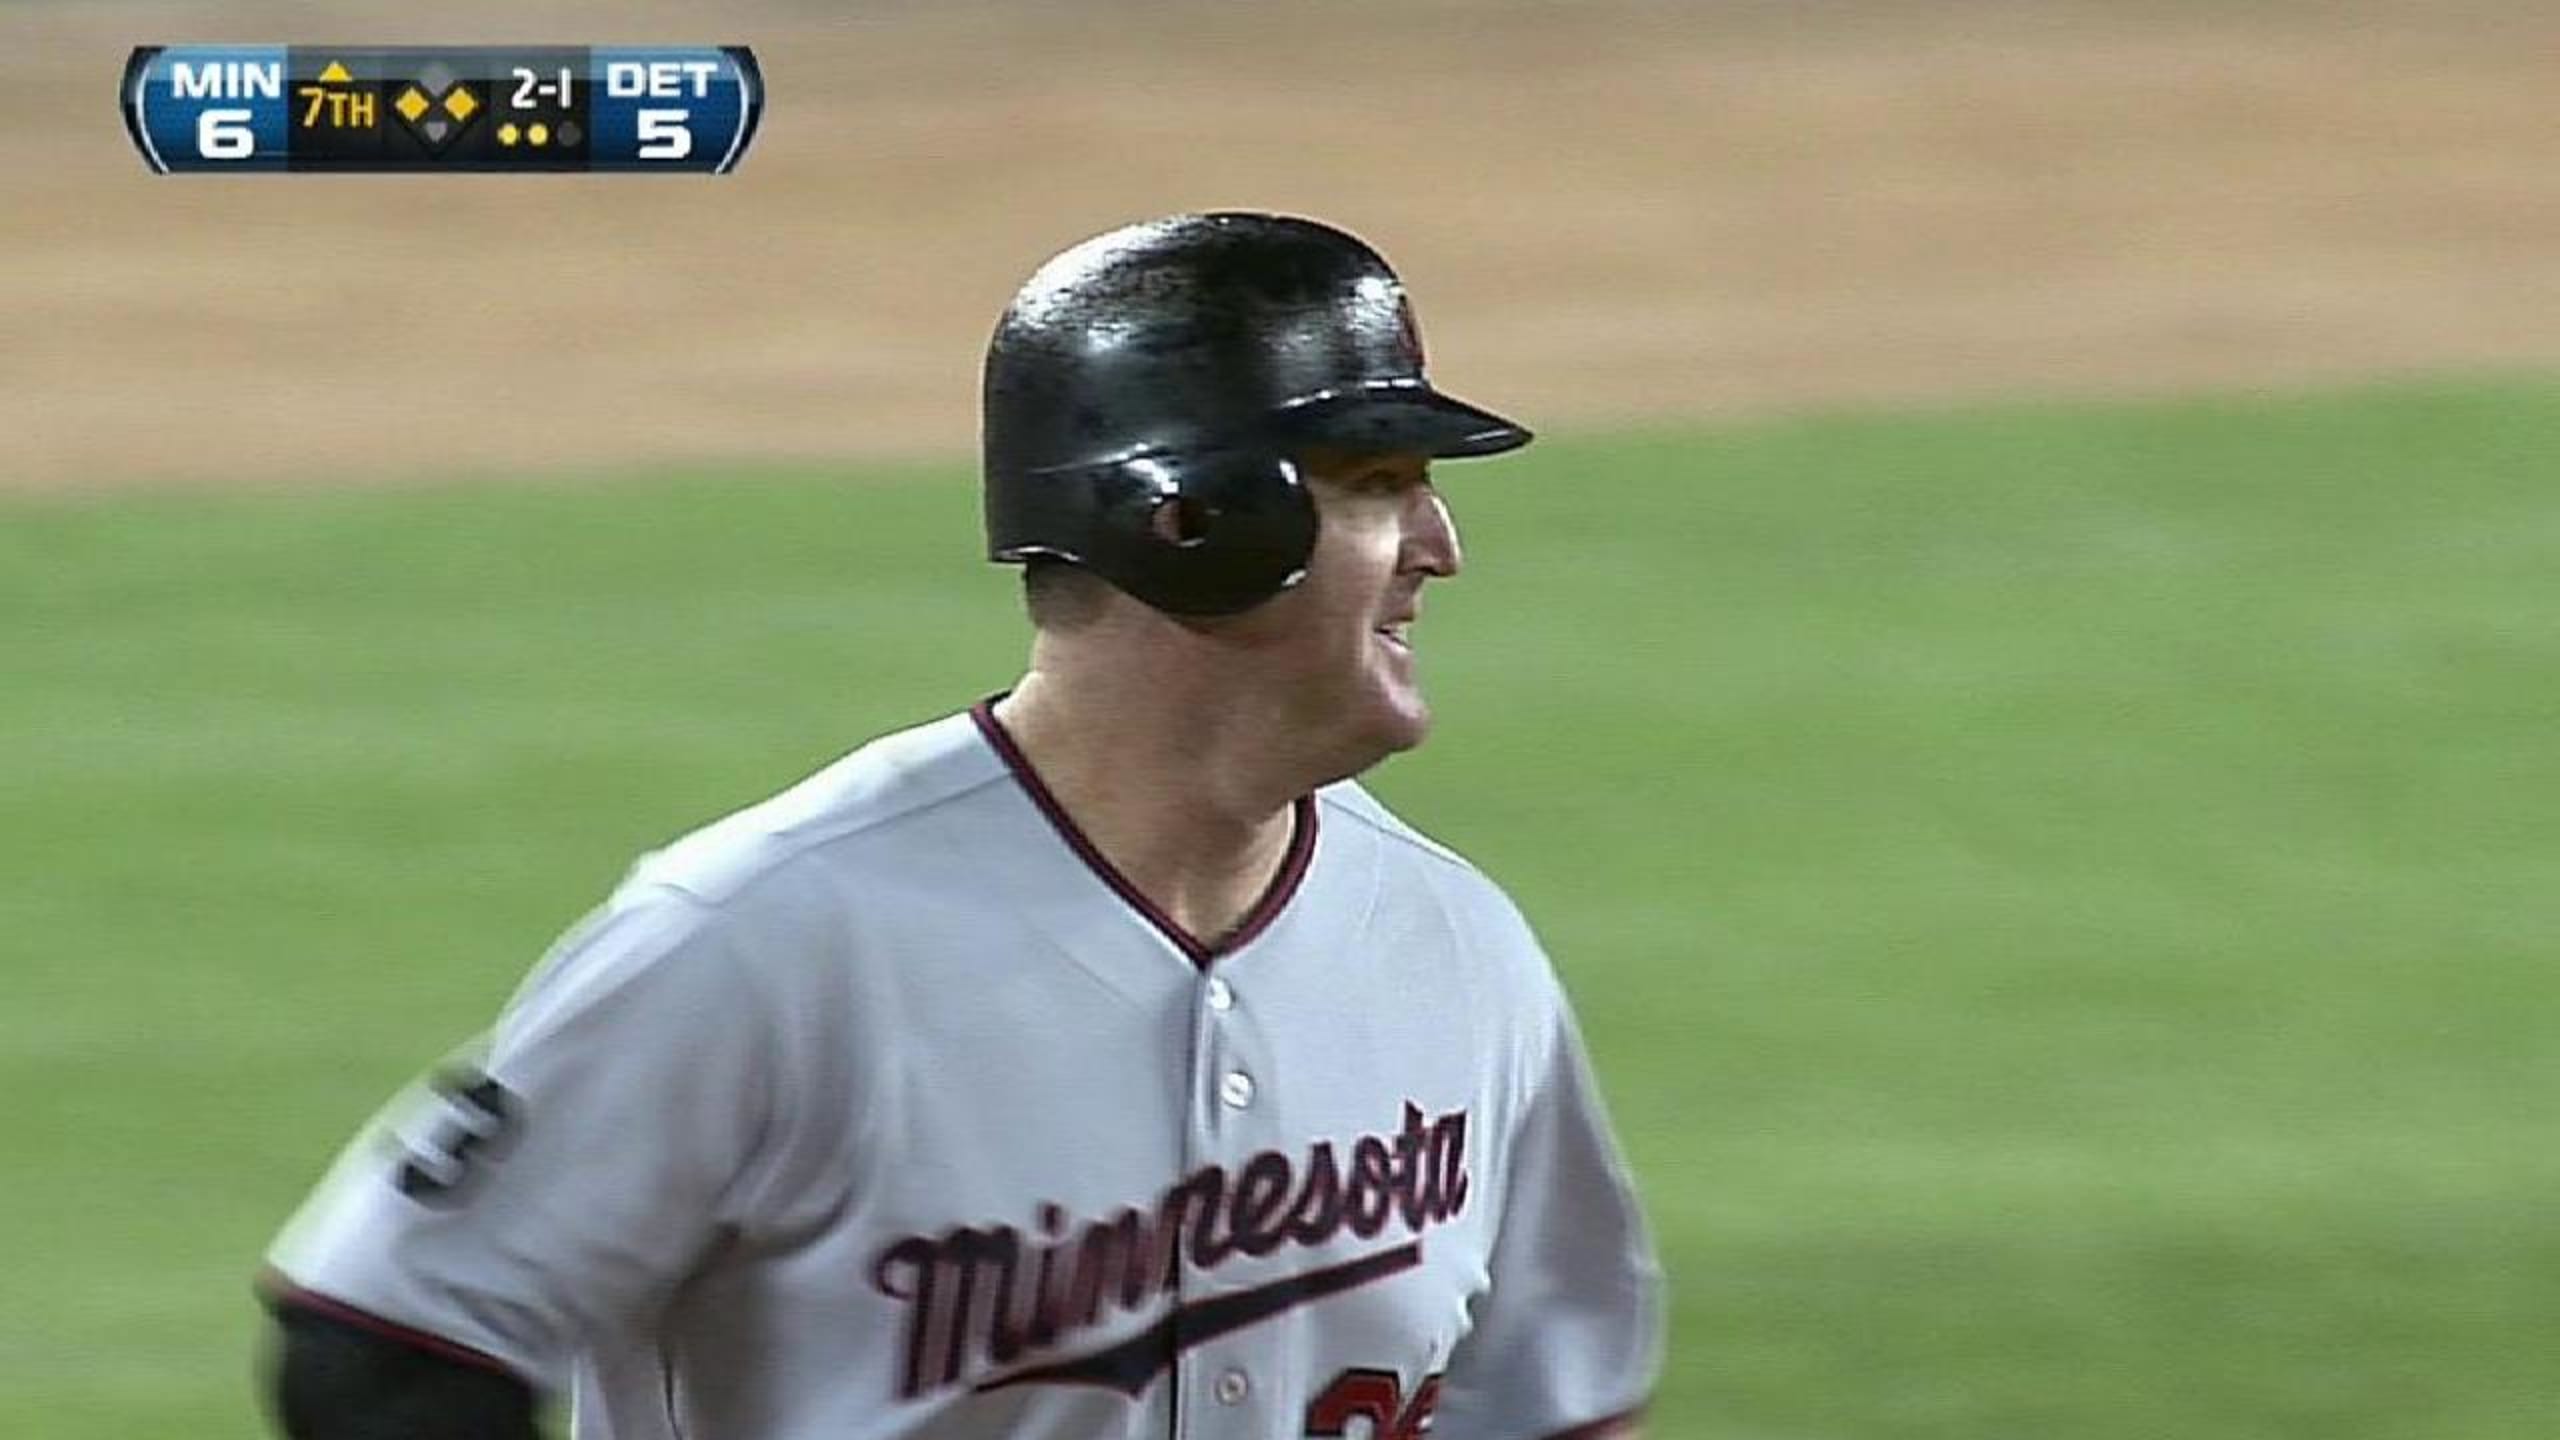 Twins hitter Jim Thome is always at the ready, thanks to his 'high  maintenance' approach